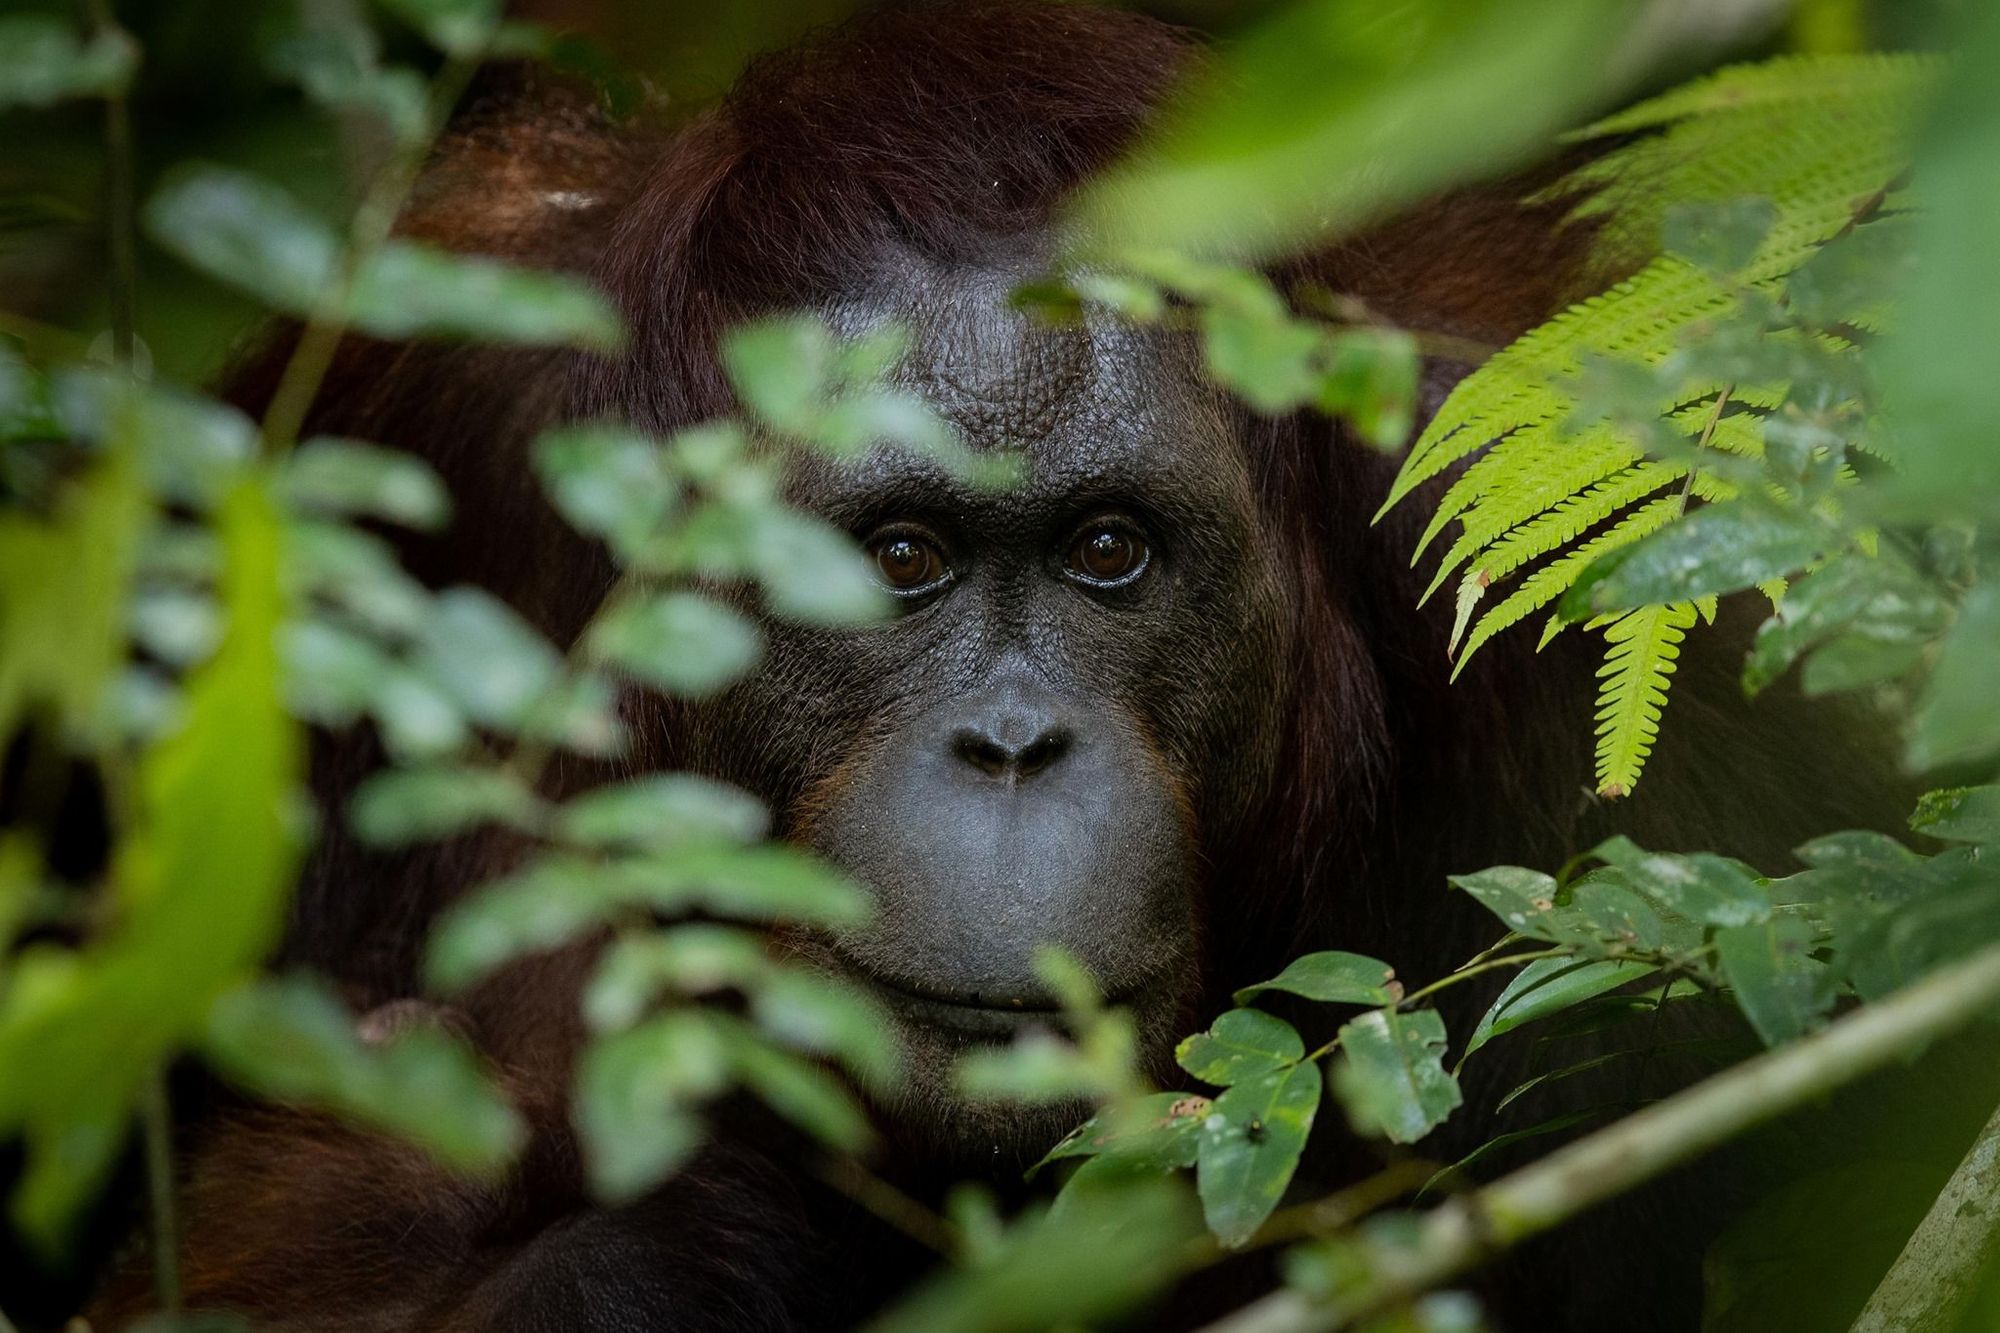 Borneo is one of only two places in the world where you can see orangutans in the wild. Photo: Paradeso Borneo